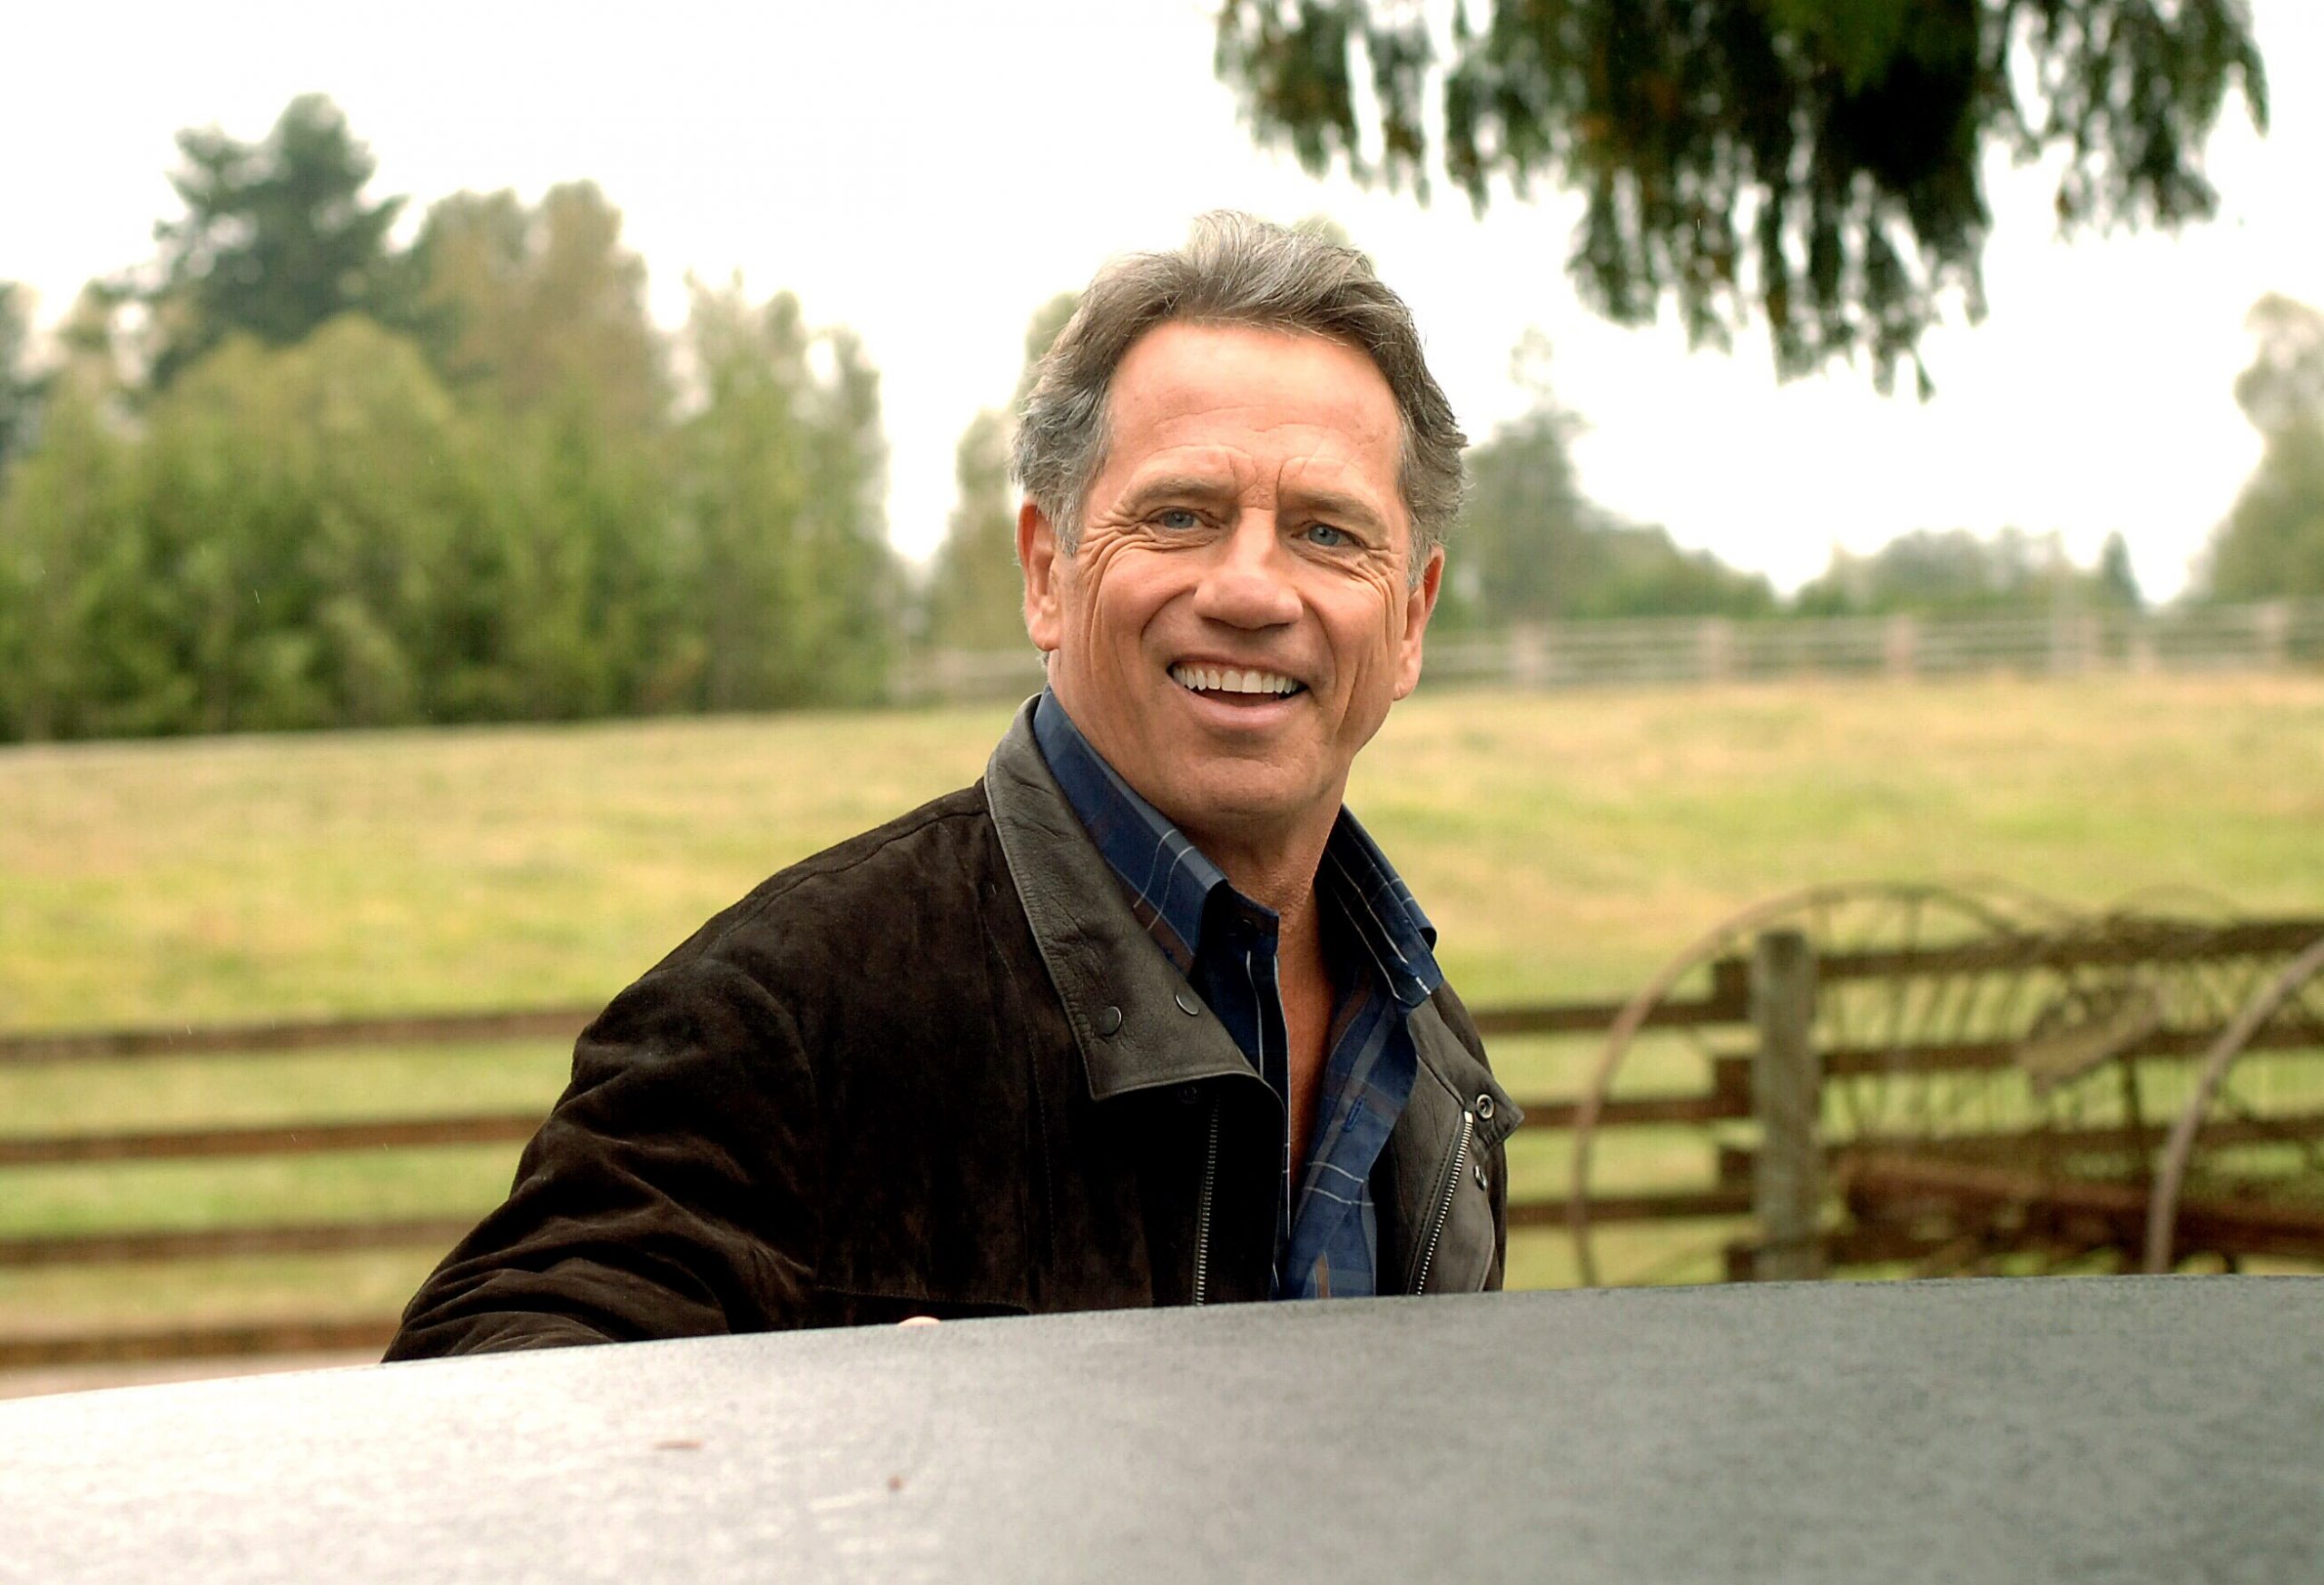 Tom Wopat on Smallville